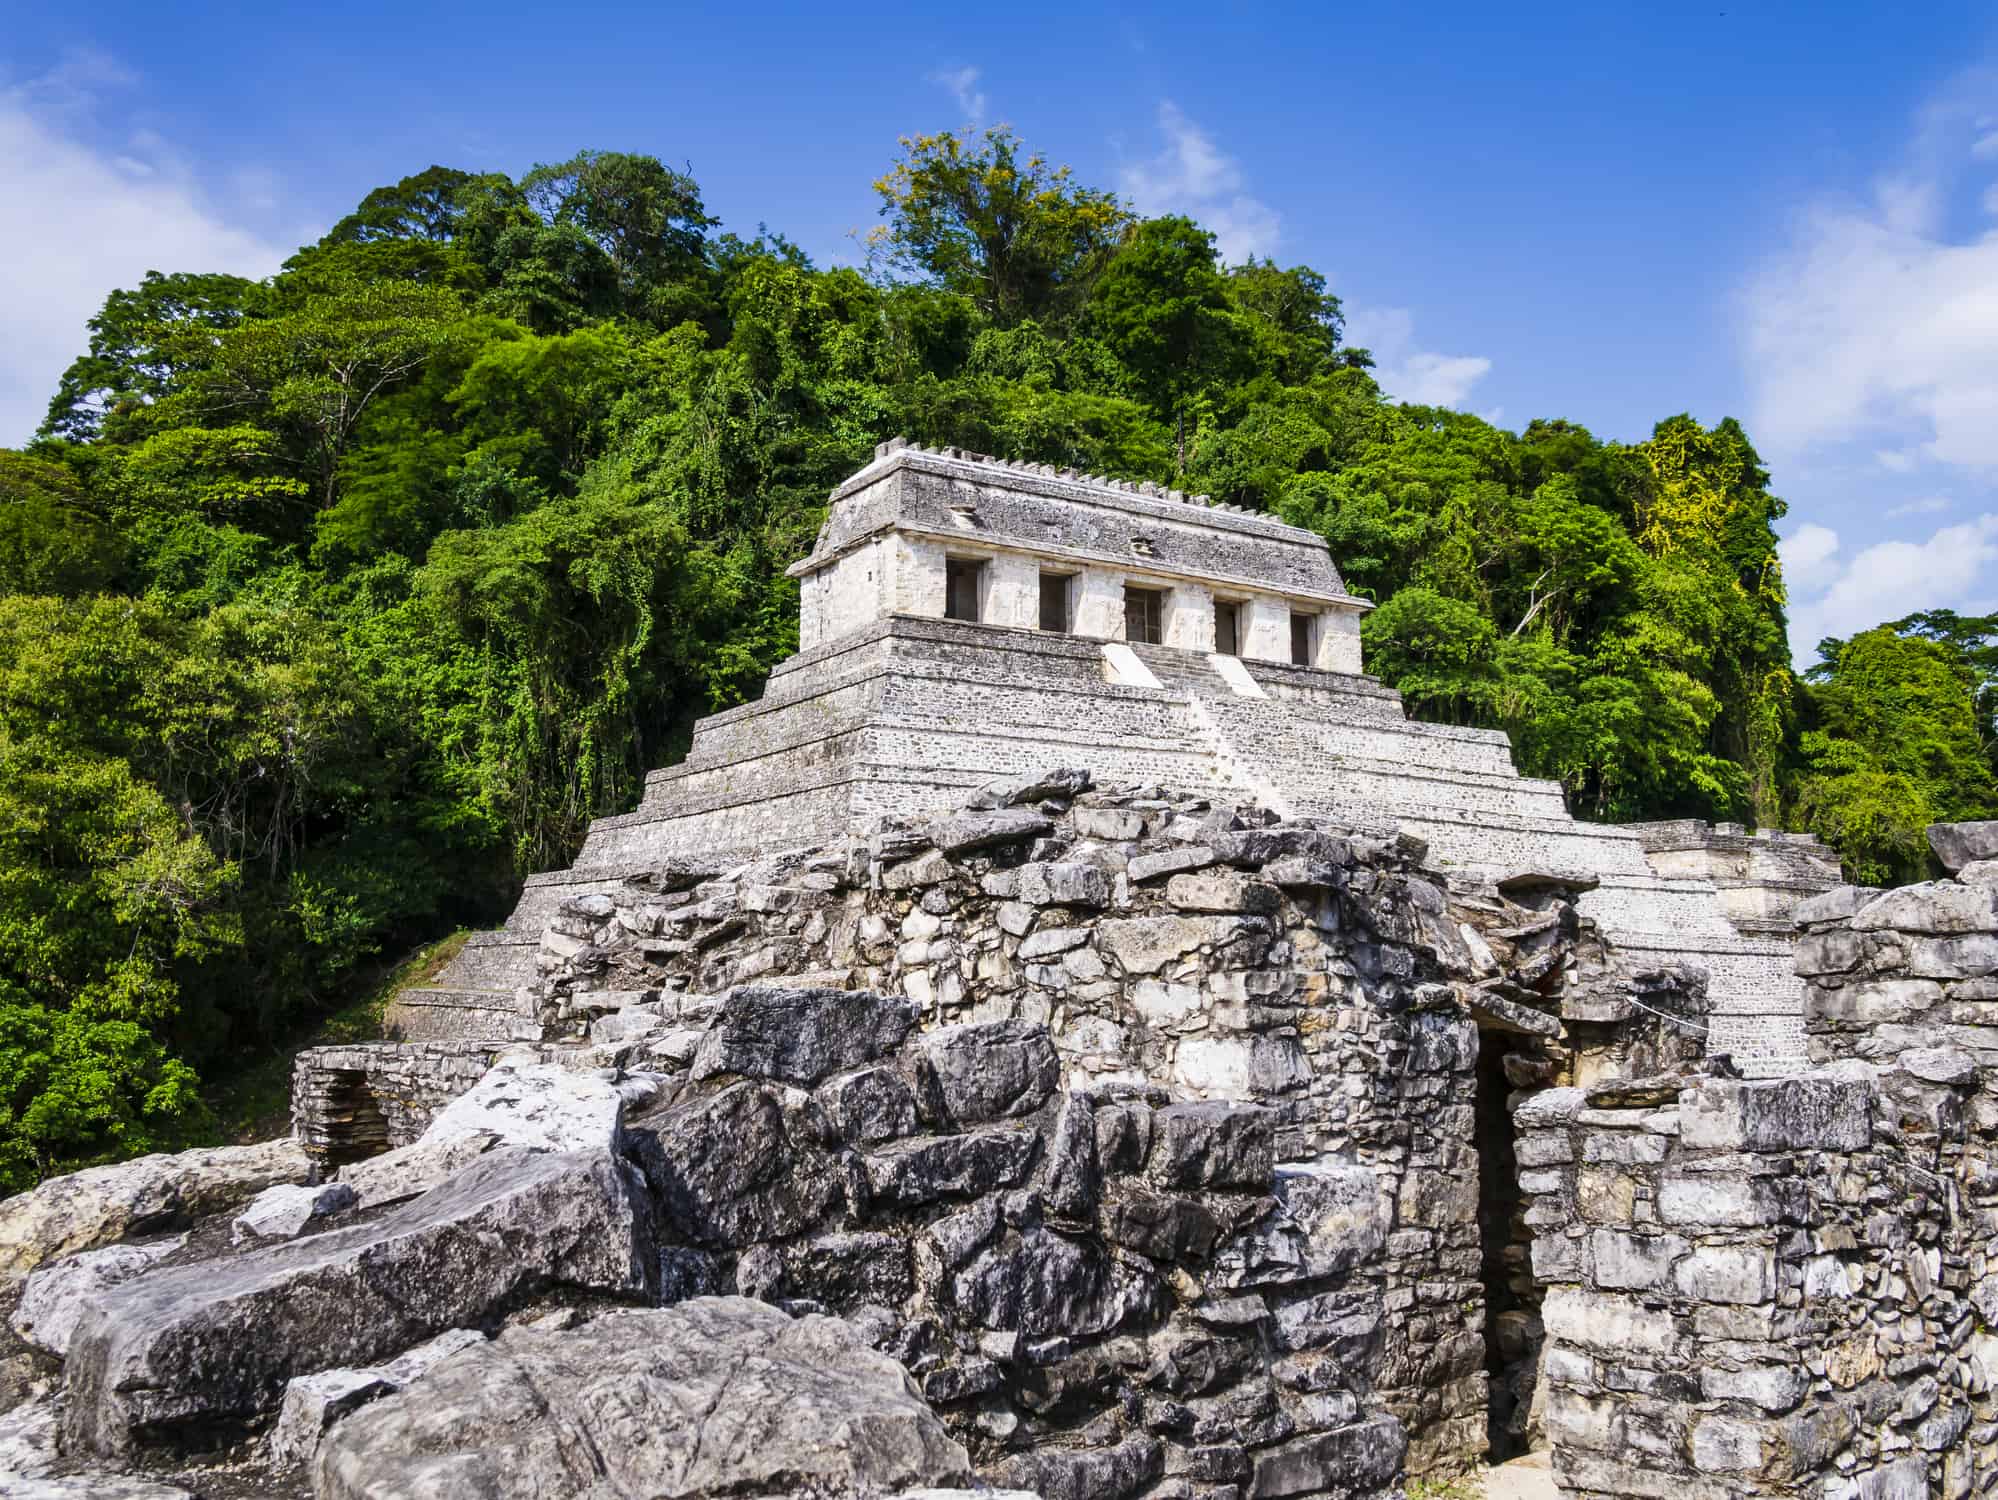 <p>Located in the state of Chiapas, the Pyramids of the Inscriptions are several pyramids in the ancient site of Palenque. These pyramid structures aren't that tall, only 89 feet, but there were temples built on top of these pyramids, which is what makes them extremely unique. The pyramids' temples have Mayan hieroglyphics written all over them. This is why they were named the Pyramids of the Inscriptions. Palenque is an archeological zone that is still being excavated and archeologists believe that only 10% has been uncovered so far.</p>